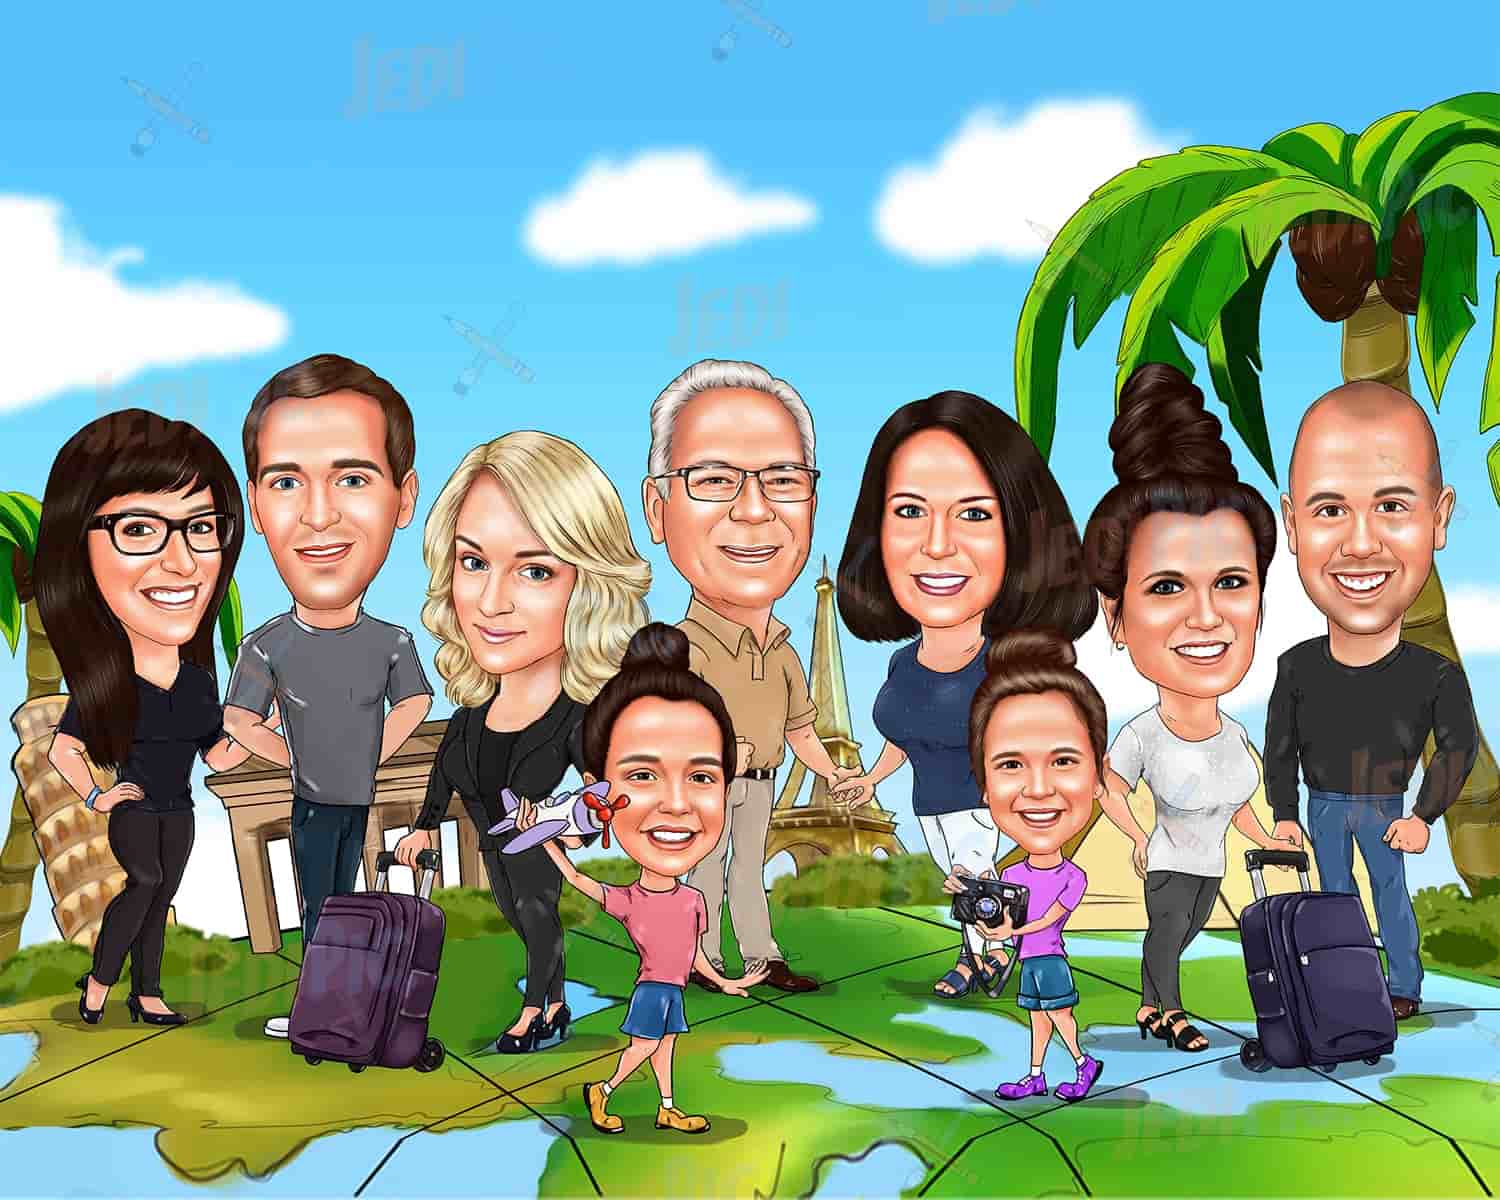 Group Caricature On Vacation in Digital Style